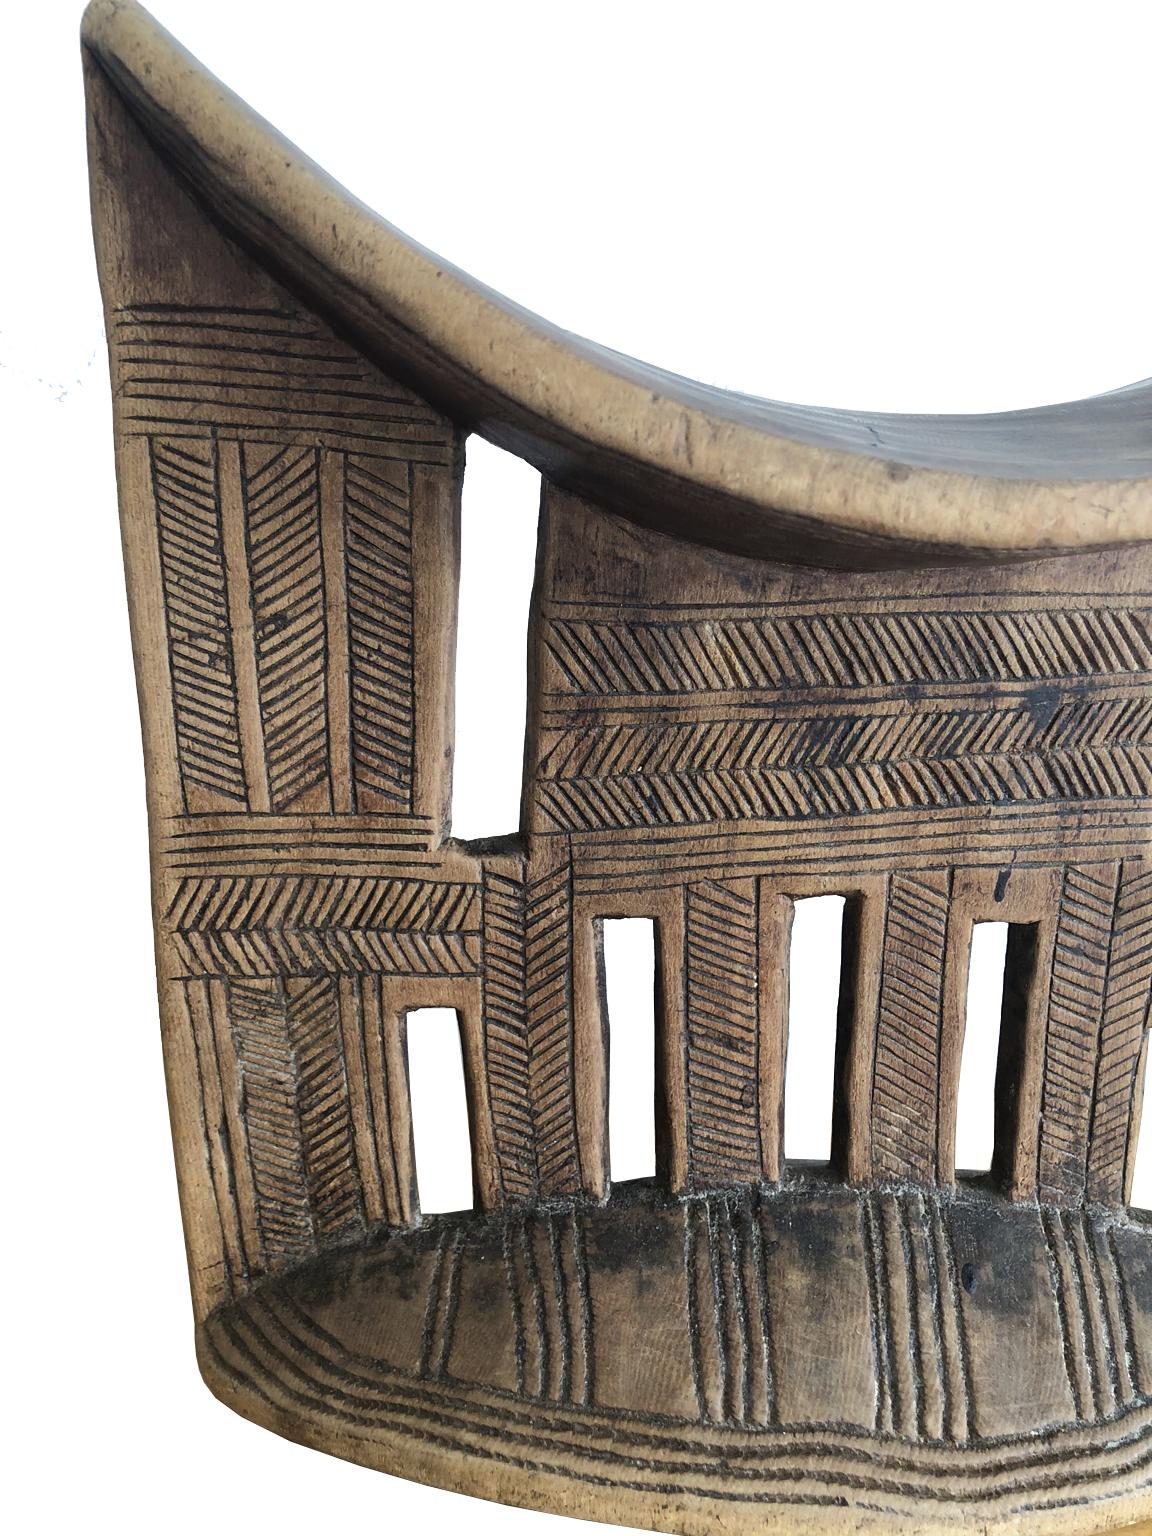 20th Century African Tribal Headrest in Carved Wood from the Sidama People of Ethiopia